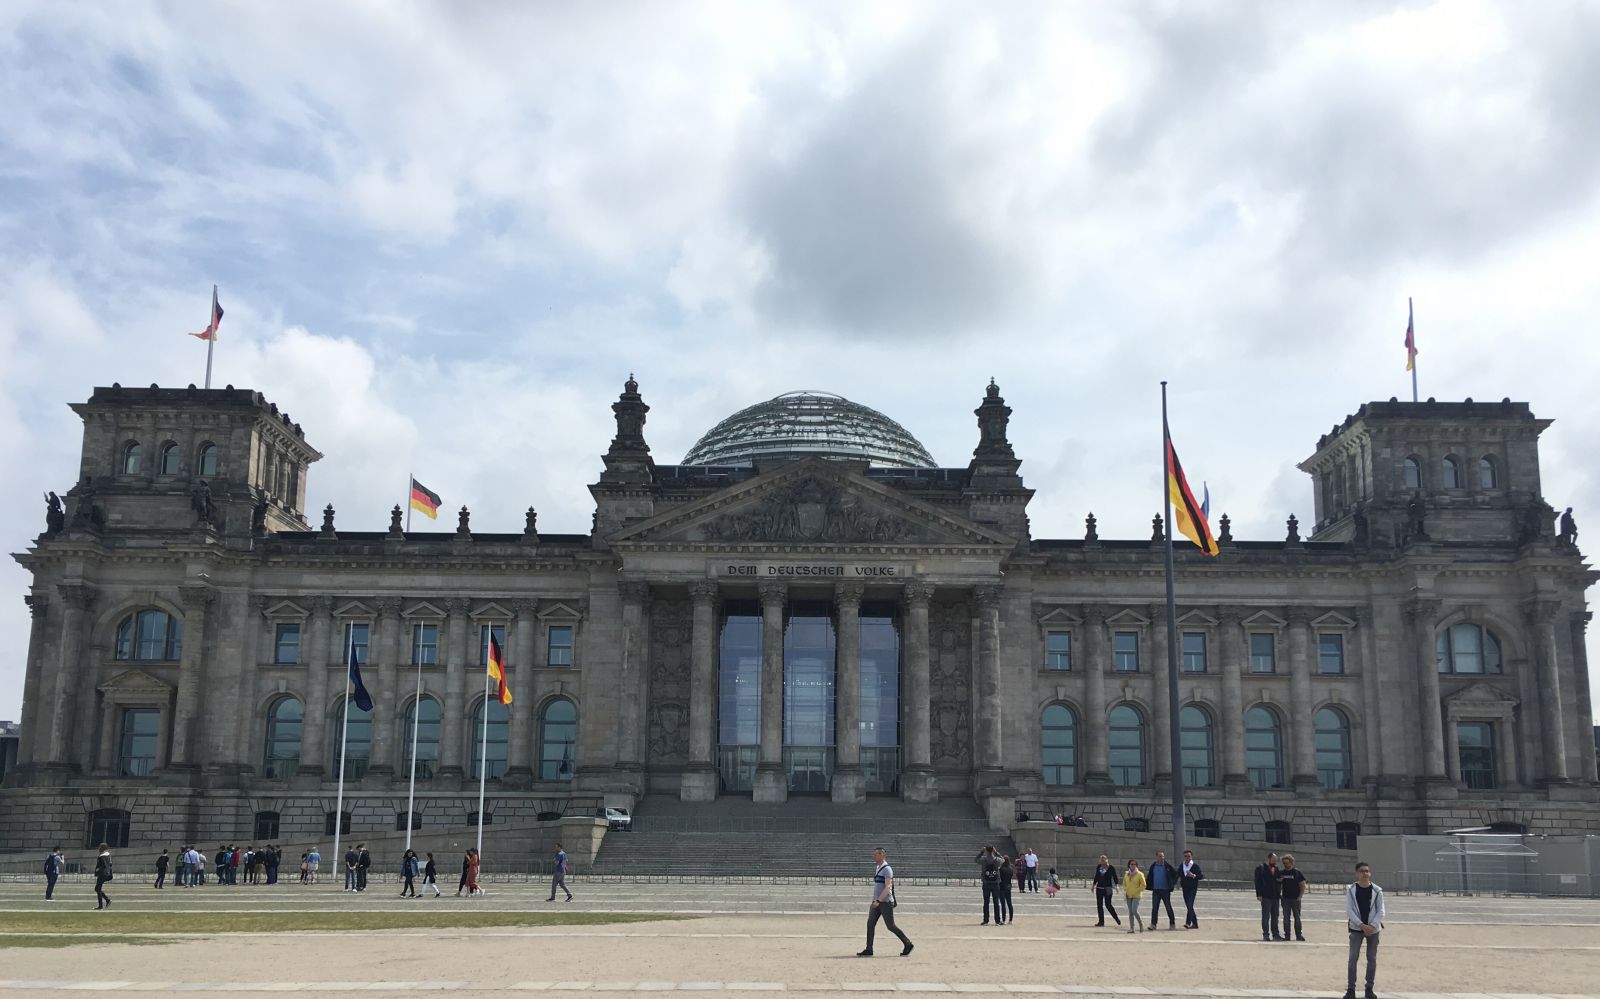 Outside the Reichstag.